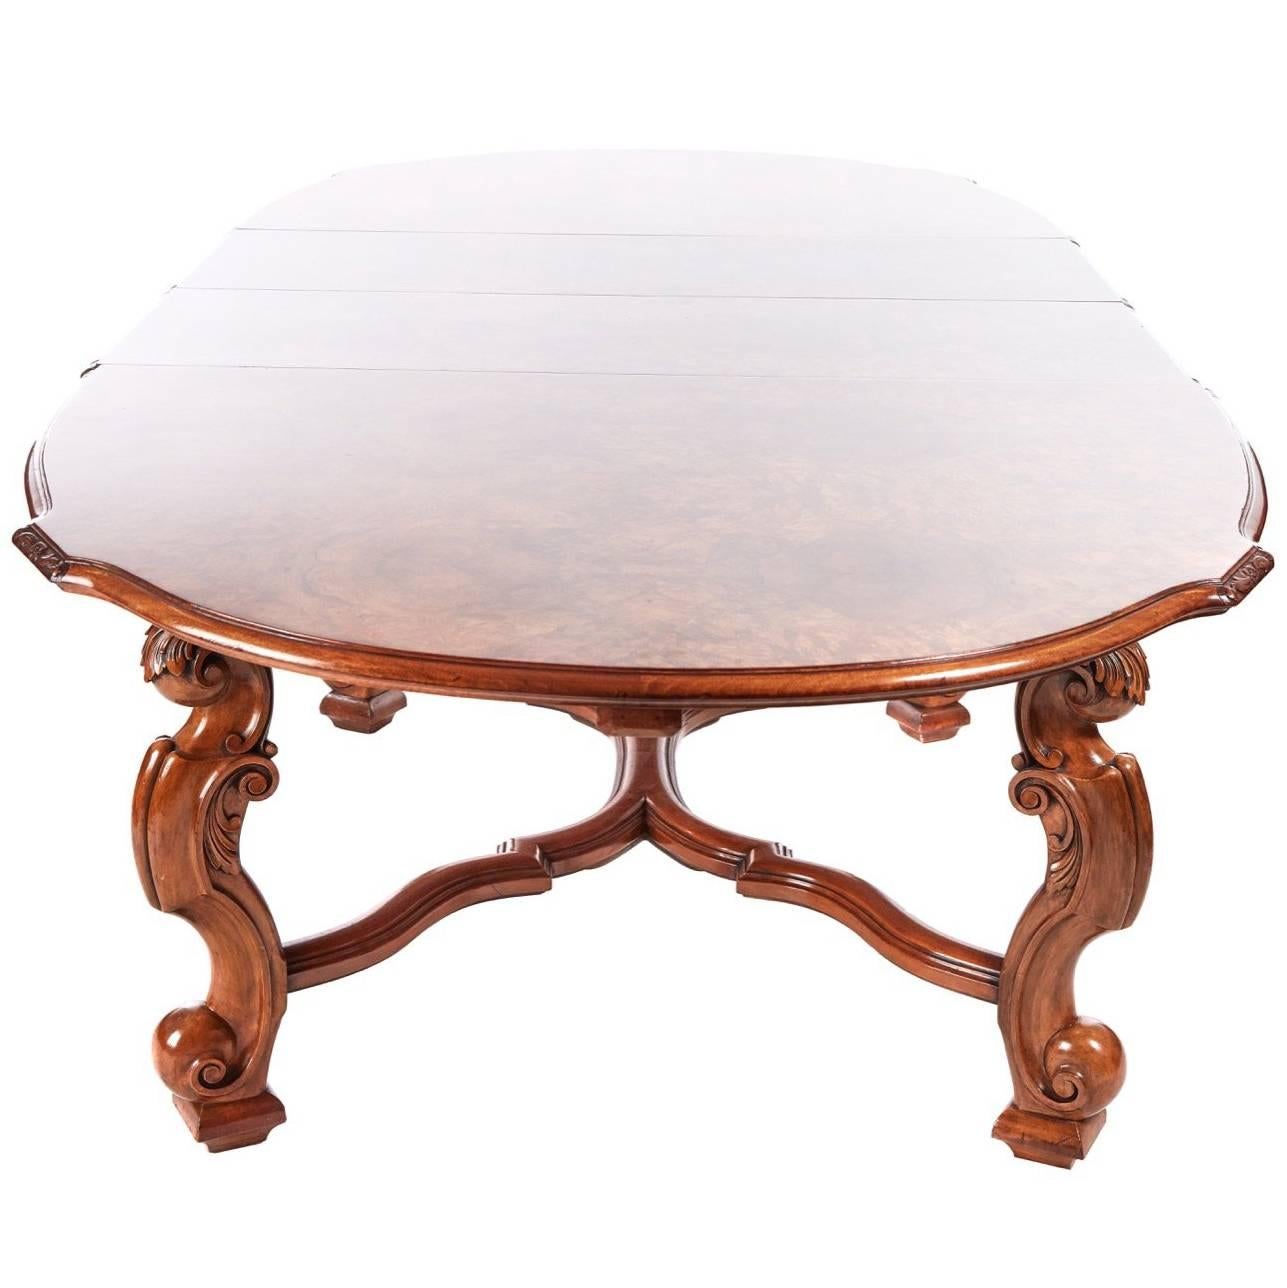 Outstanding Antique Burr Walnut Extending Dining Table For Sale